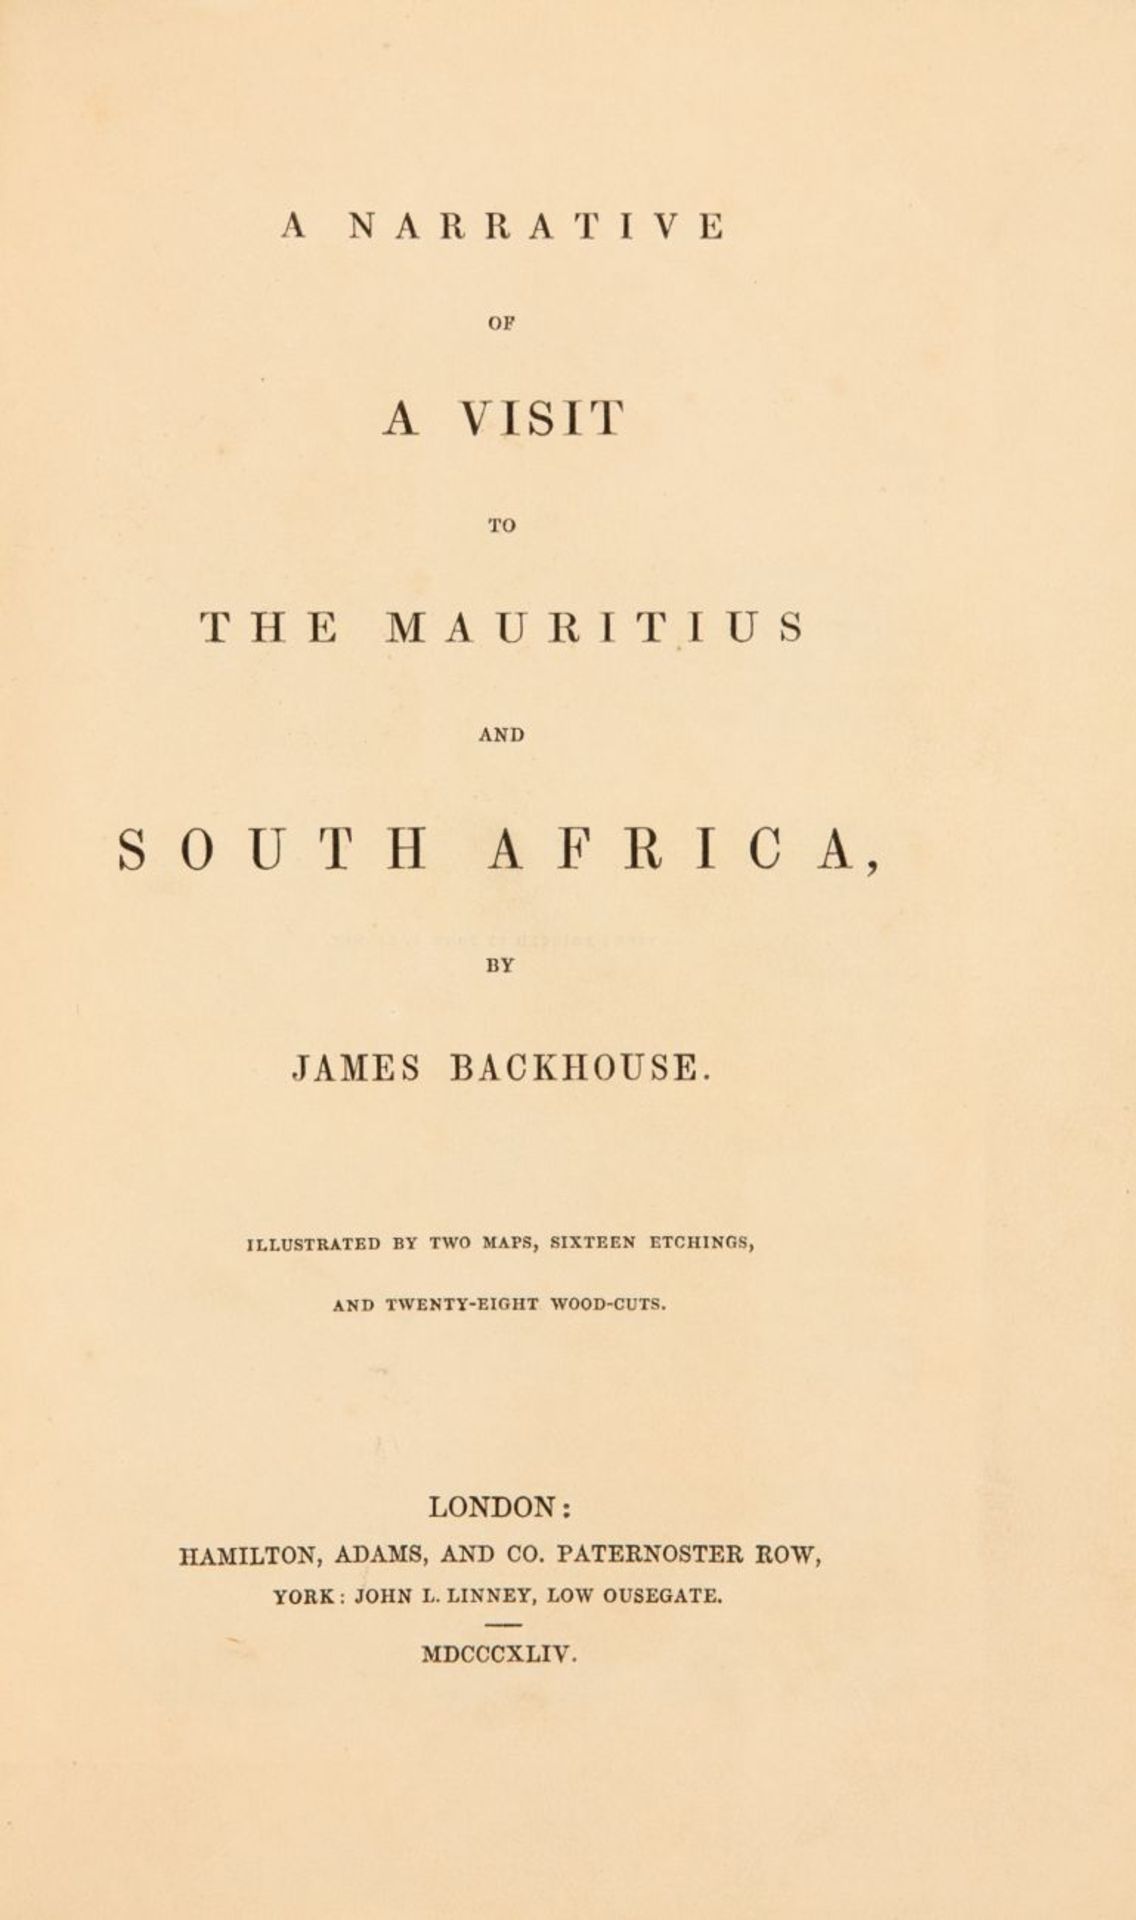 J. Backhouse, A narrative of a visit to the Mauritius and South Africa. London 1844.